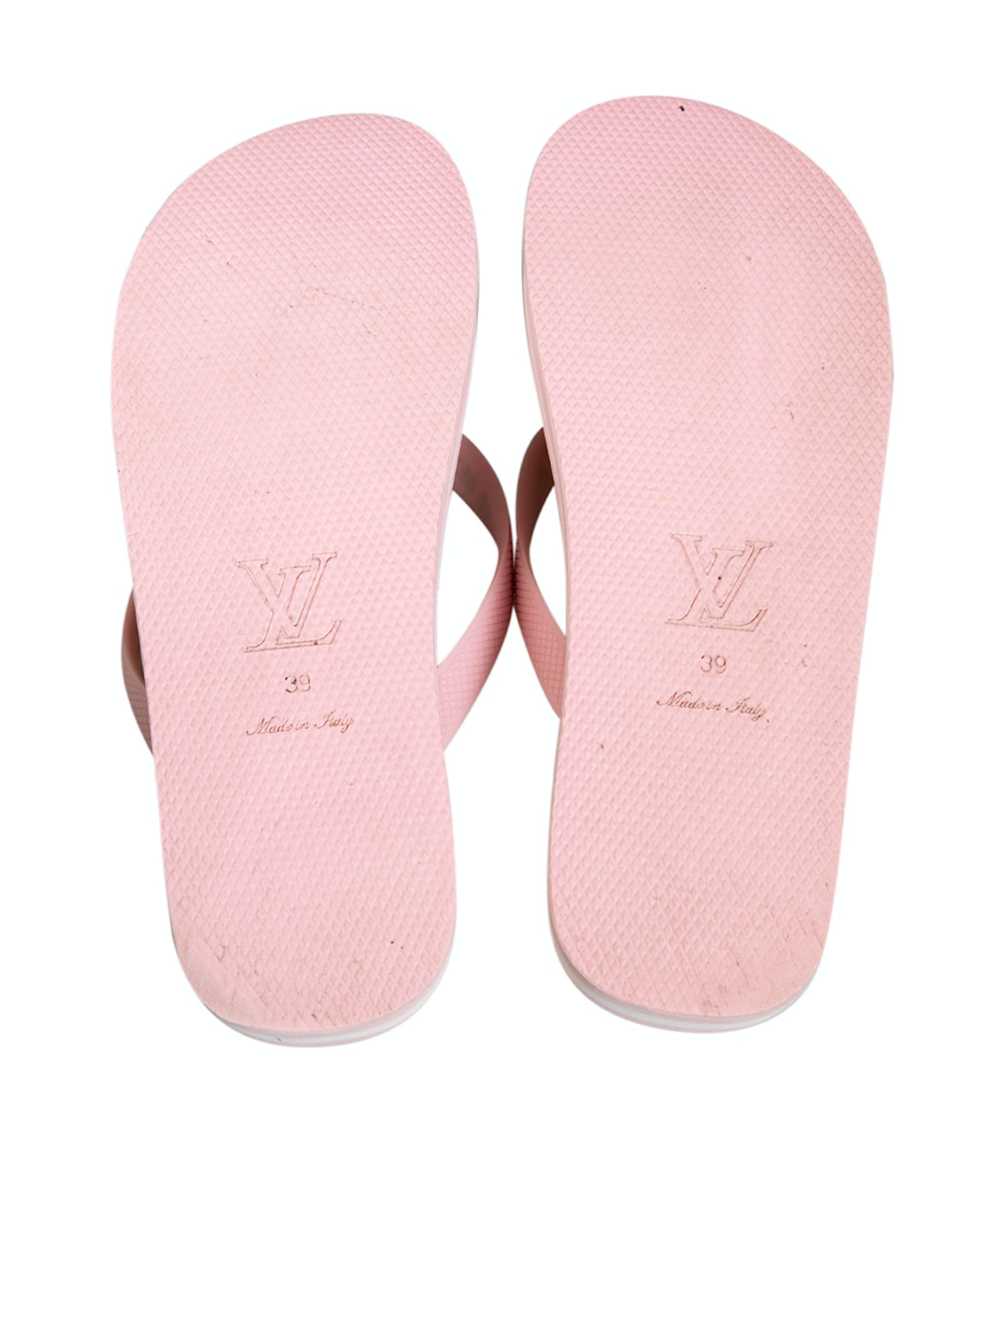 Louis Vuitton Pink “By The Pool” Logo Slippers - image 4